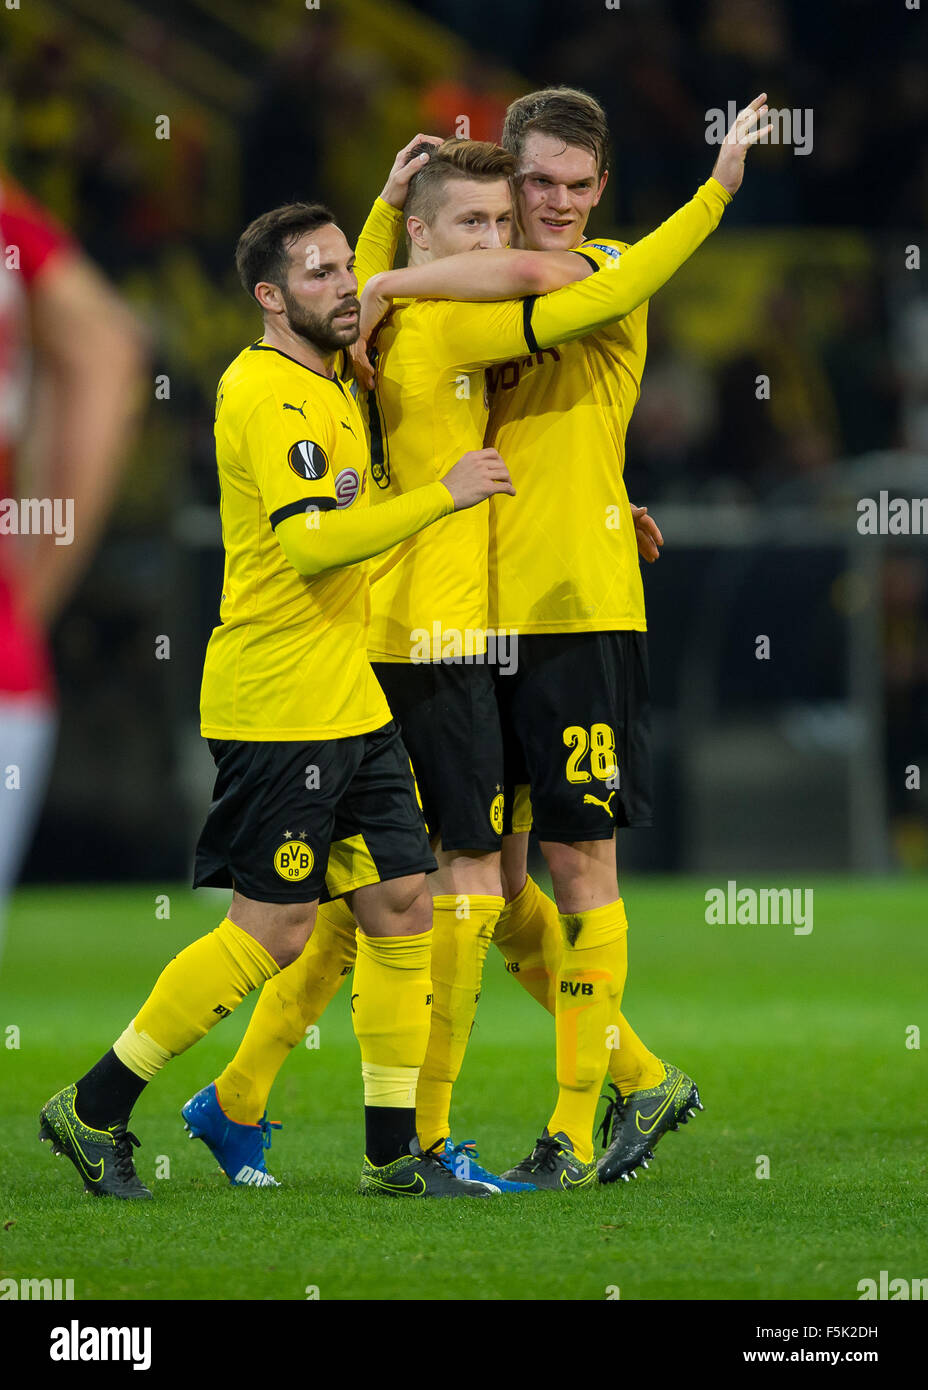 Dortmund, Germany. 5th Nov, 2015. Dortmund's Marco Reus (c) celebrates his goal at 1:0 with teammates Matthias Ginter (r) and Gonzalo Castro (l) during the Europa League group C football match between Borussia Dortmund and FK Qabala at the Signal Iduna Park in Dortmund, Germany, 5 November 2015. PHOTO: GUIDO KIRCHNER/DPA/Alamy Live News Stock Photo